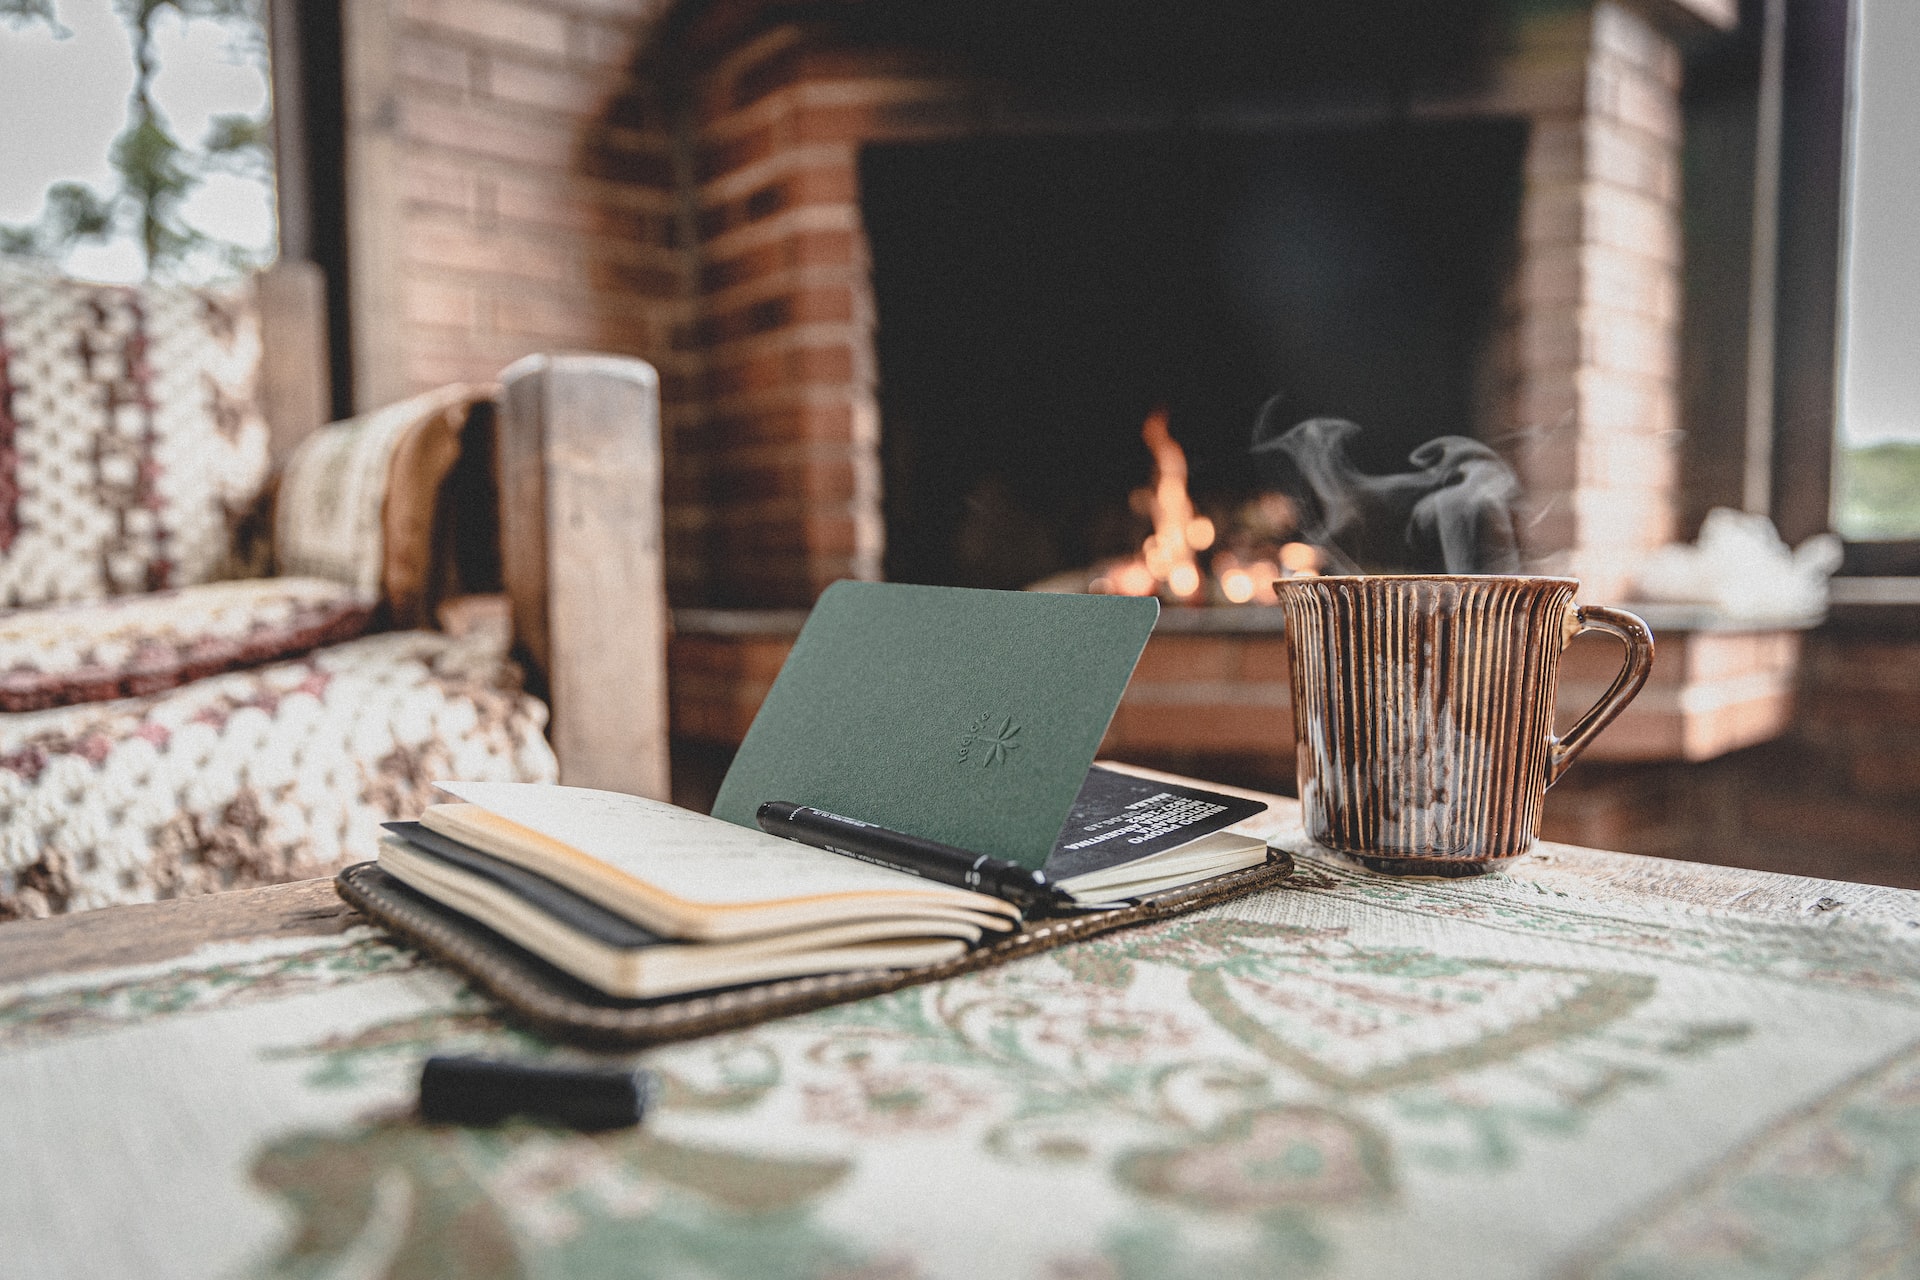 Journal and steaming drink with a fireplace in the background